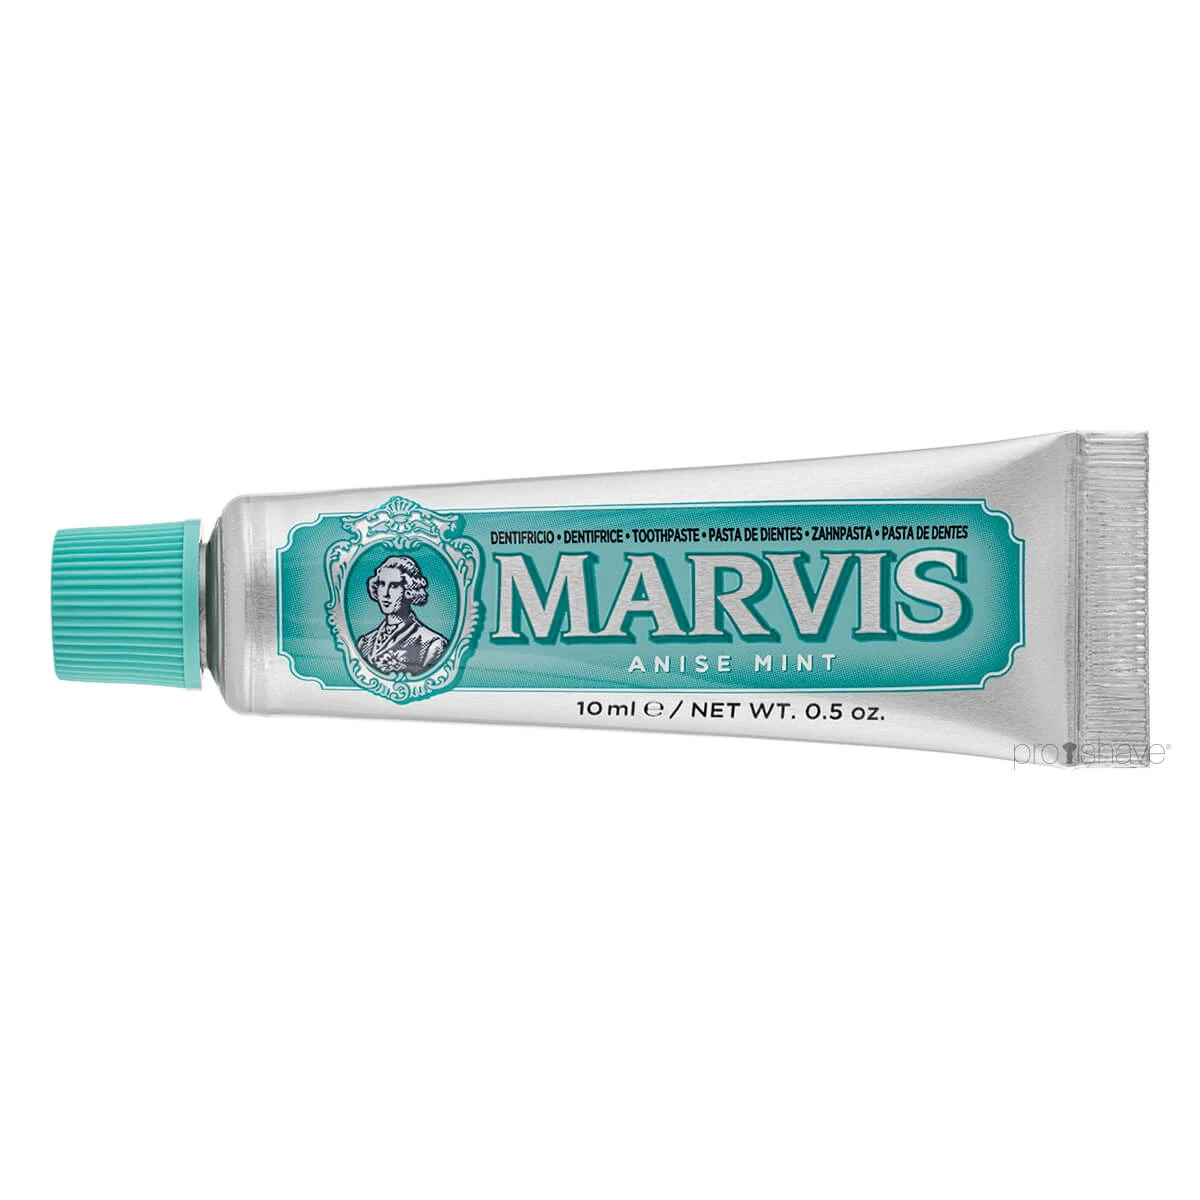 Toothpaste 10 ml. with Anise Mint from Marvis